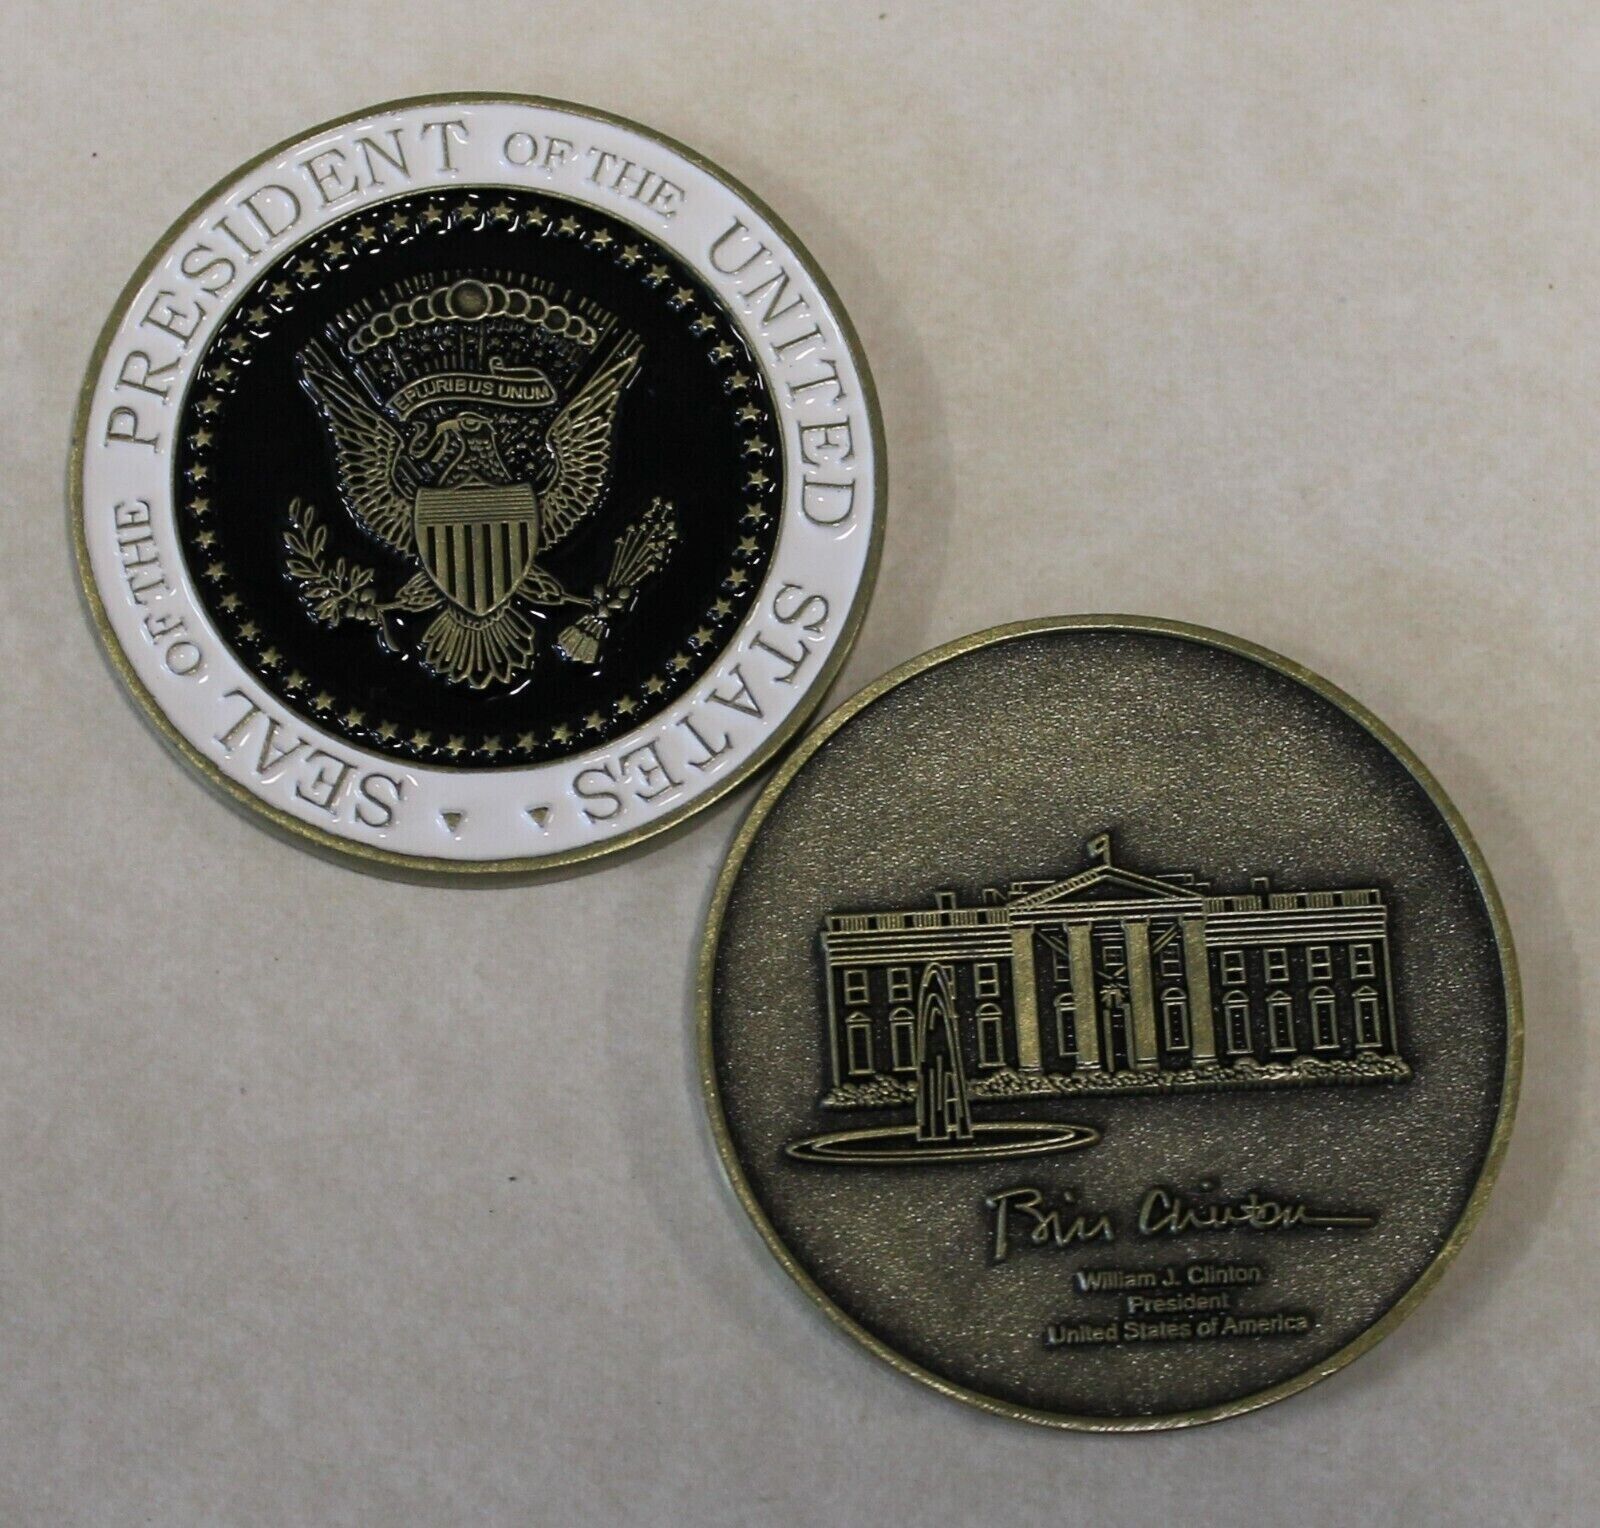 President of the United States William J. Bill Clinton Challenge Coin